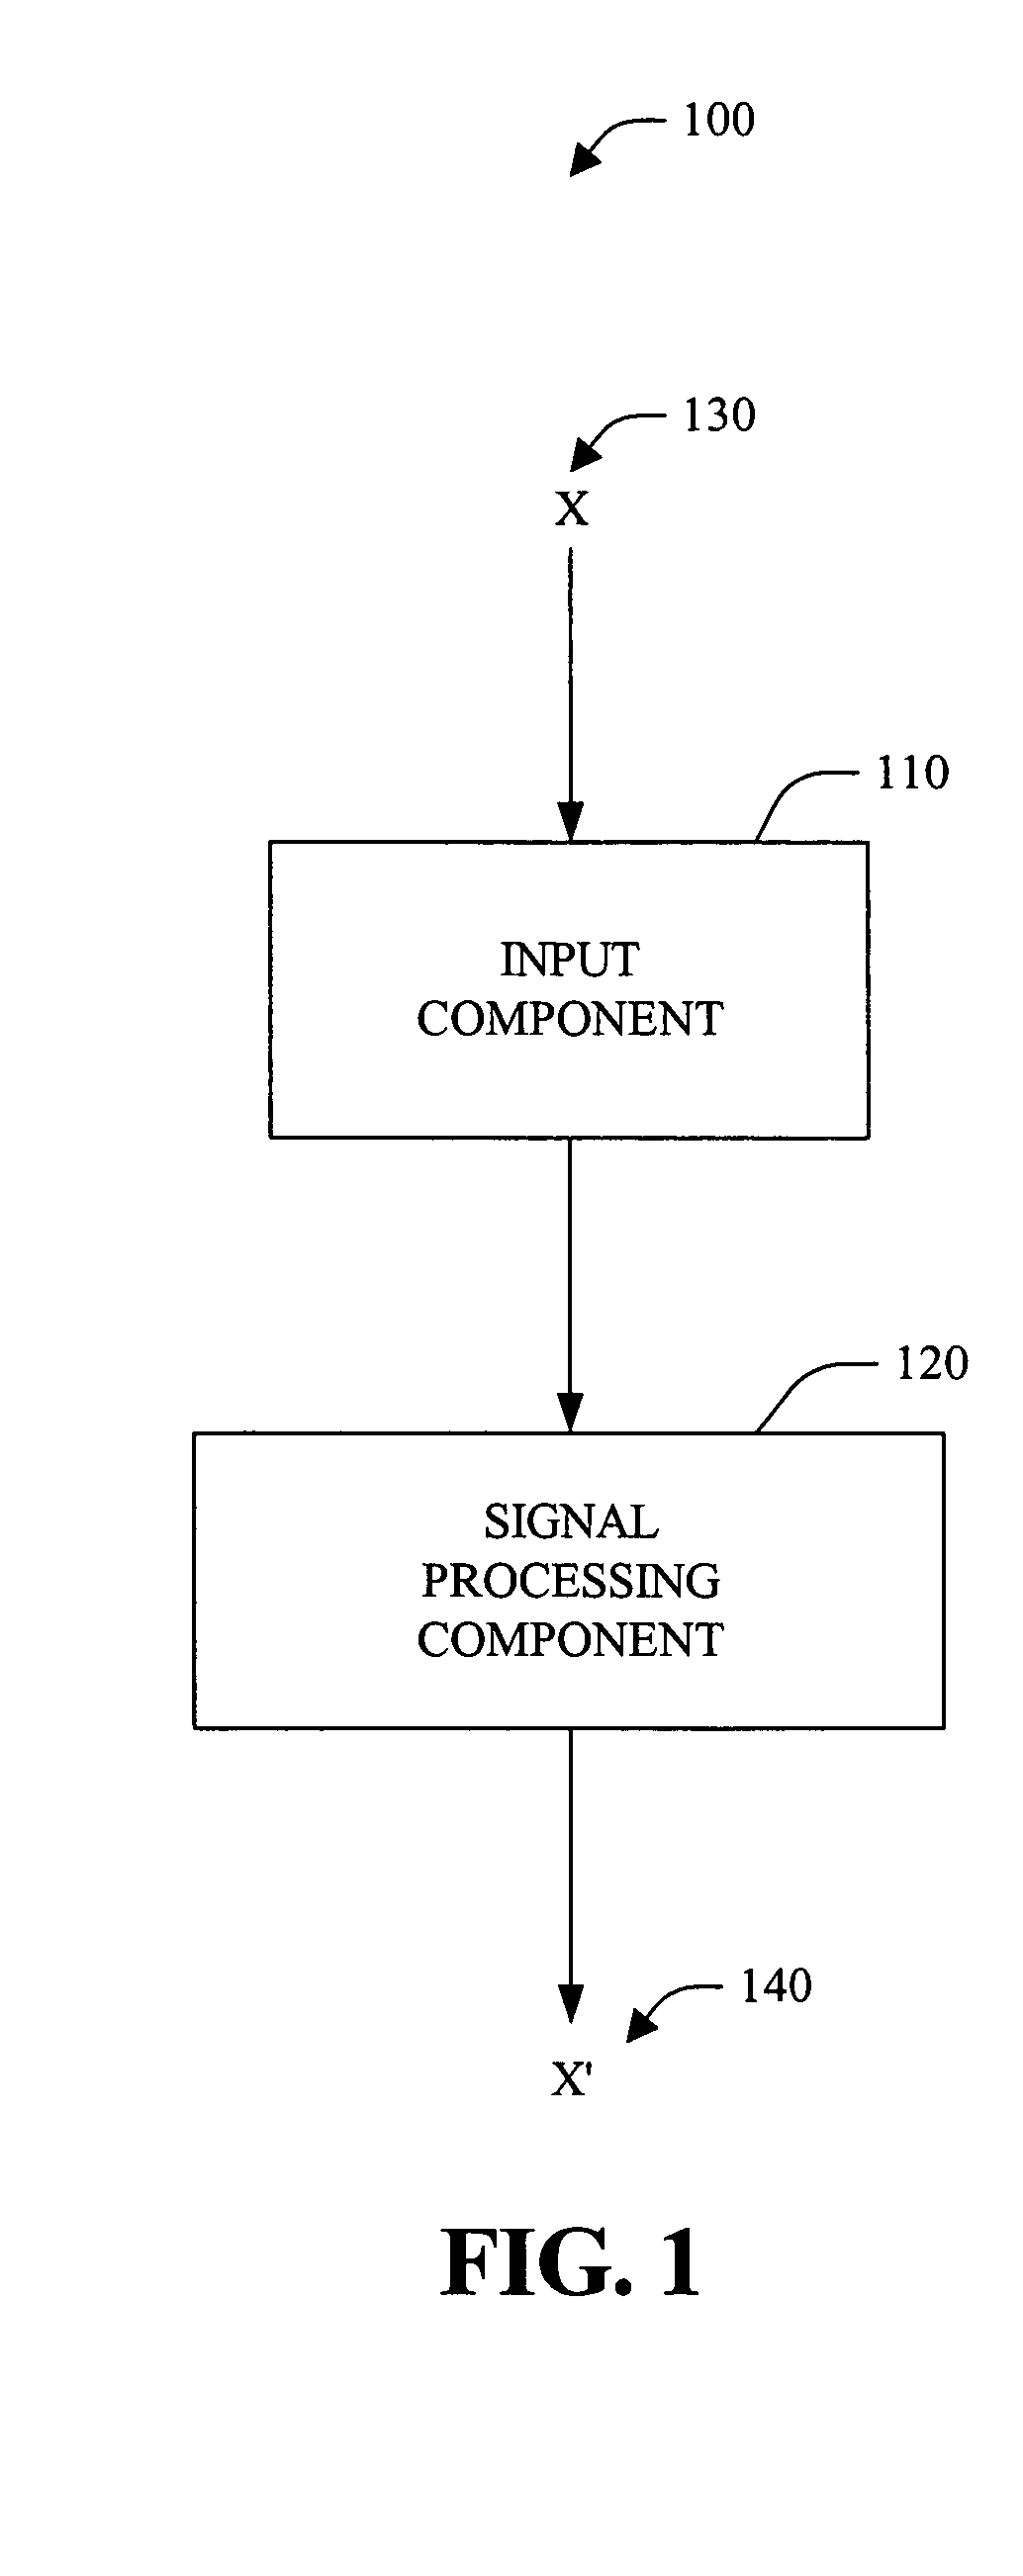 Systems and methods for echo cancellation with arbitrary playback sampling rates